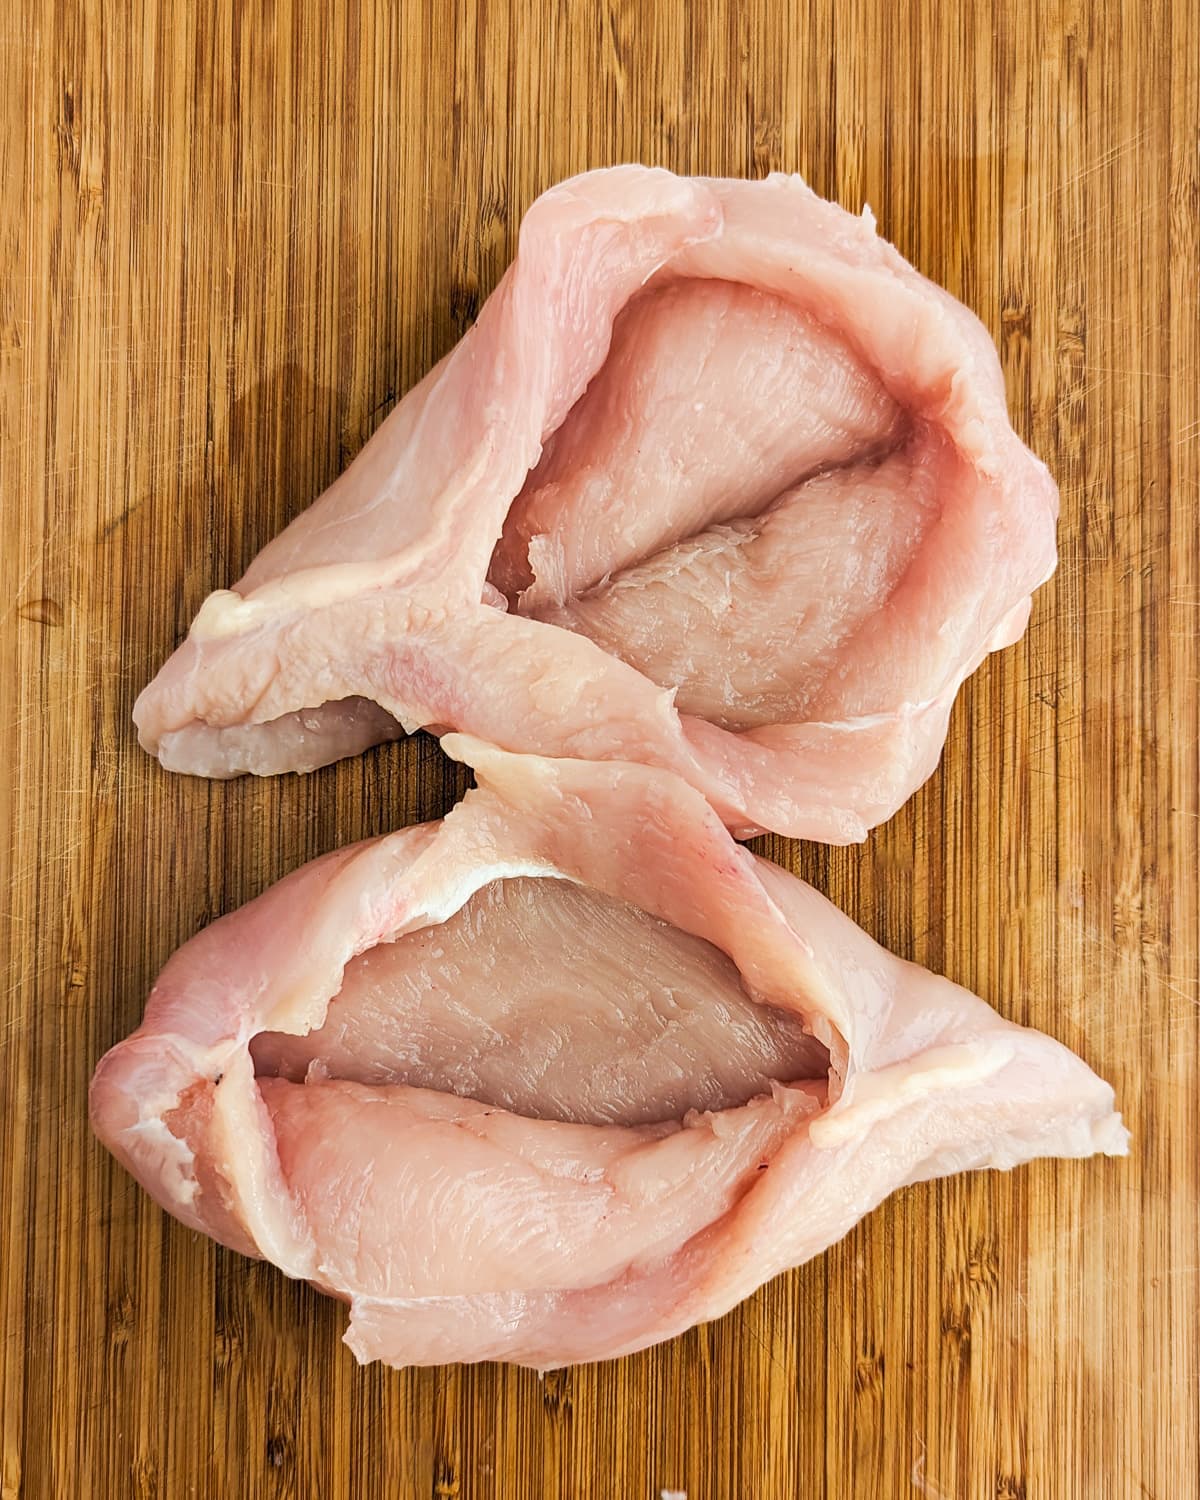 Two pockets of chicken breasts on a wooden cutting board.